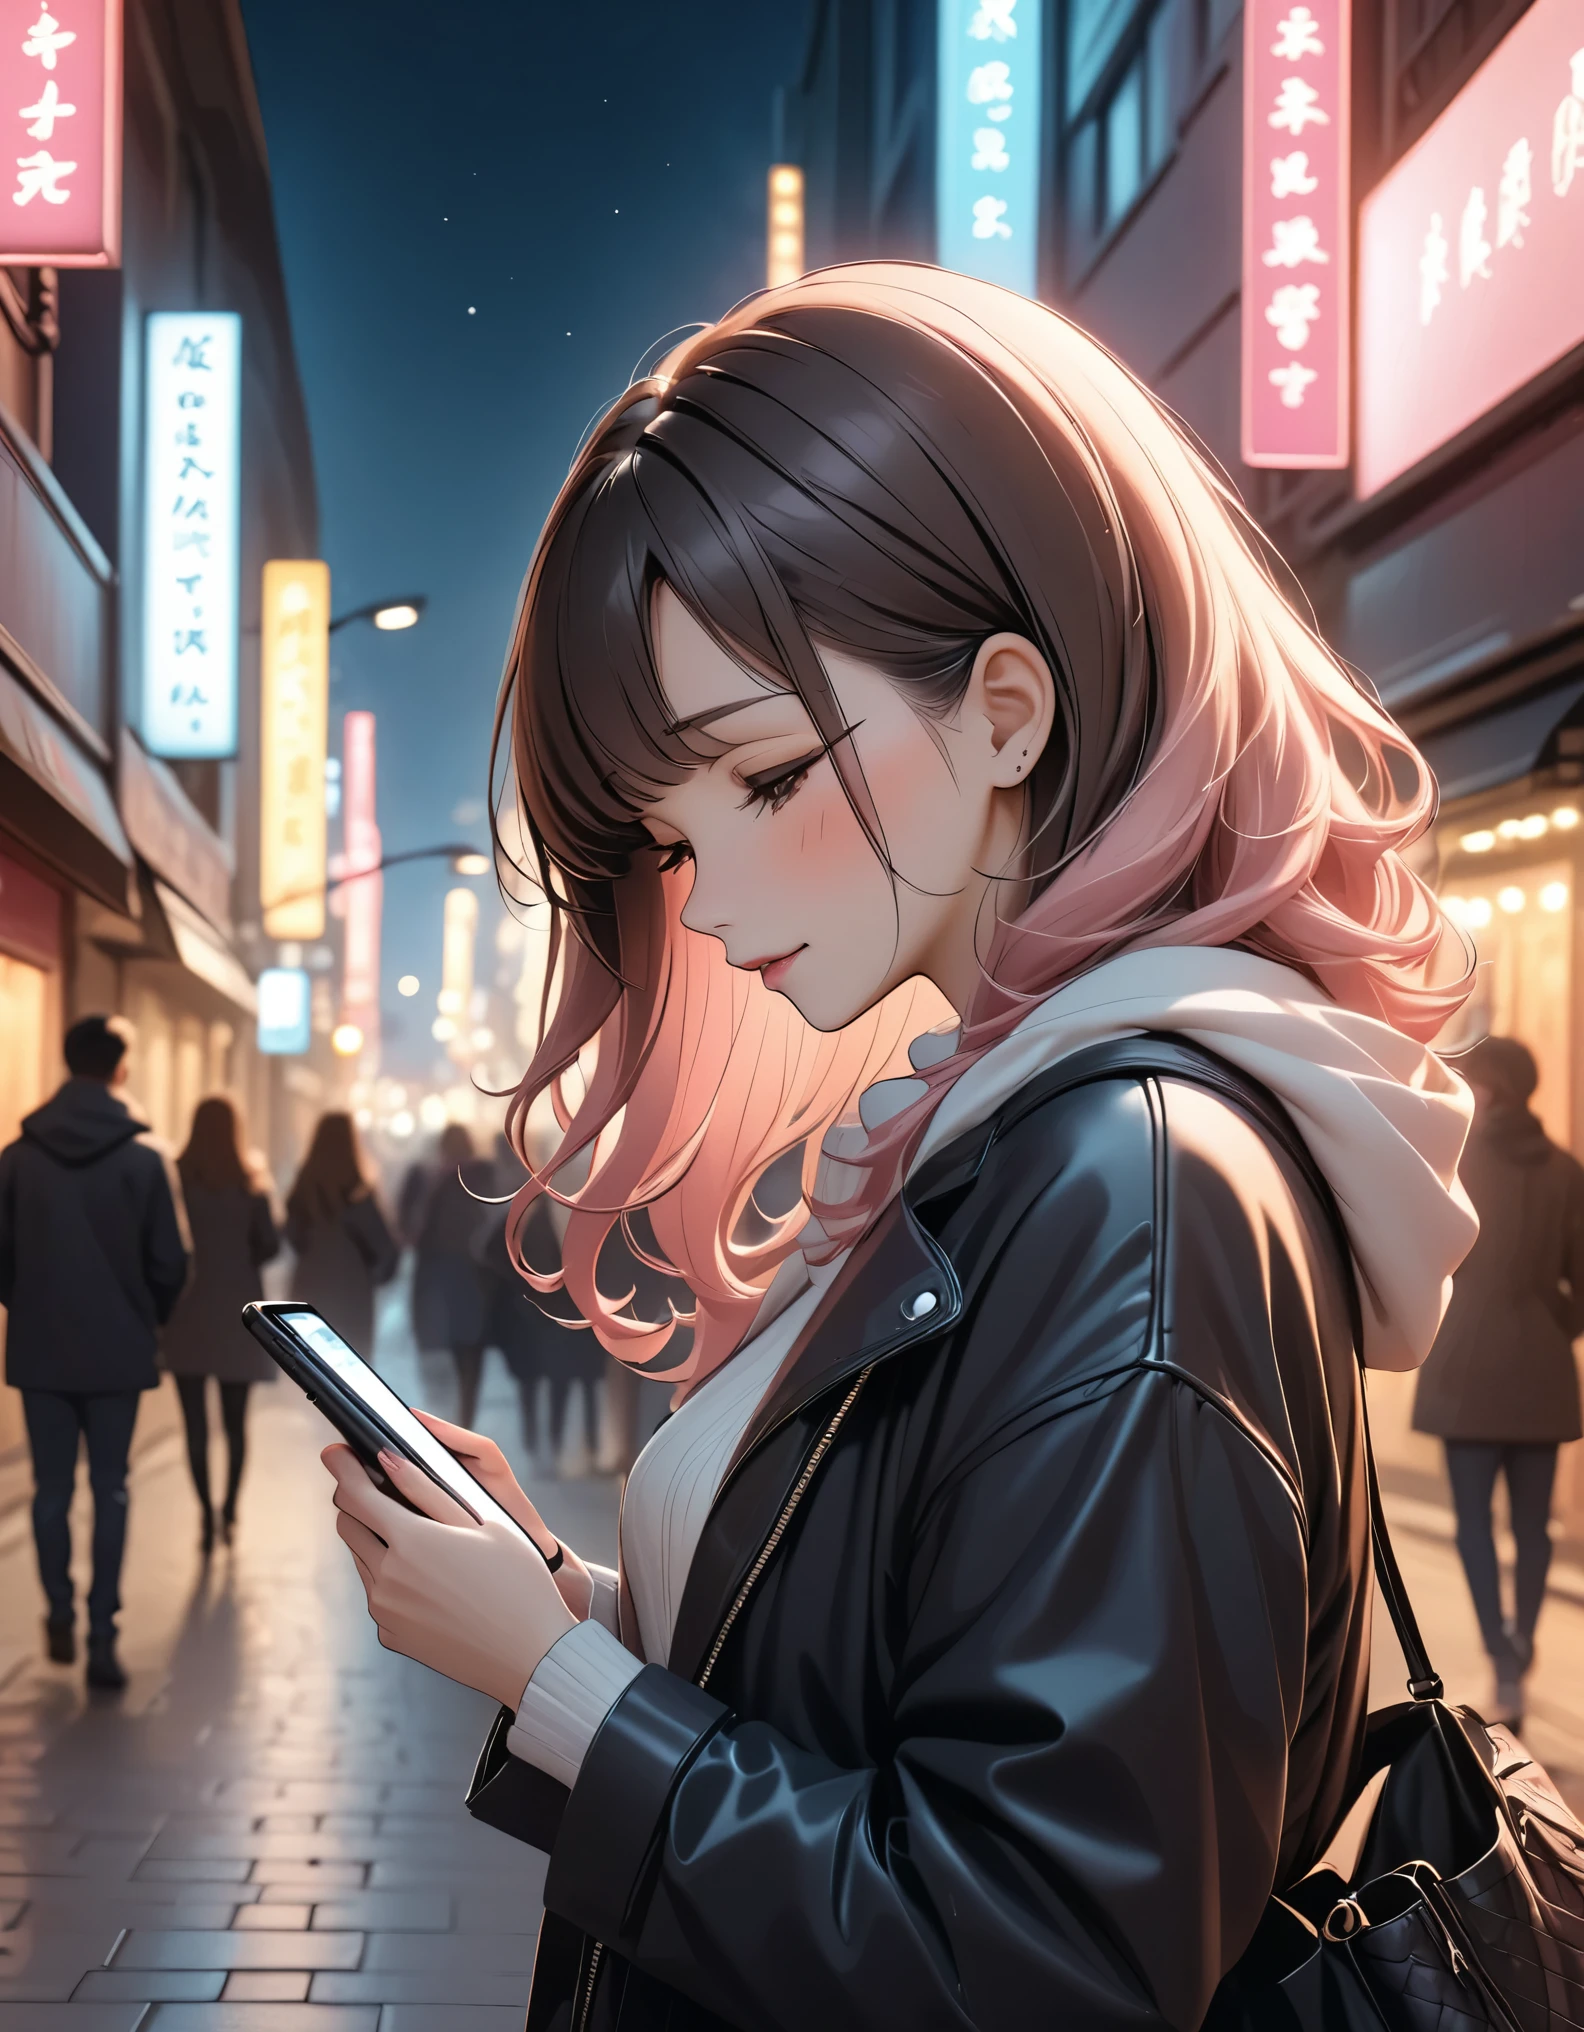 Beautiful woman, street lights at night, Fiddling with smartphones, Hot Pants, Fragrant pink flowers, Passersby, night gradient, fine details, Subtle tones, There is a sense of tranquility in the picture.  